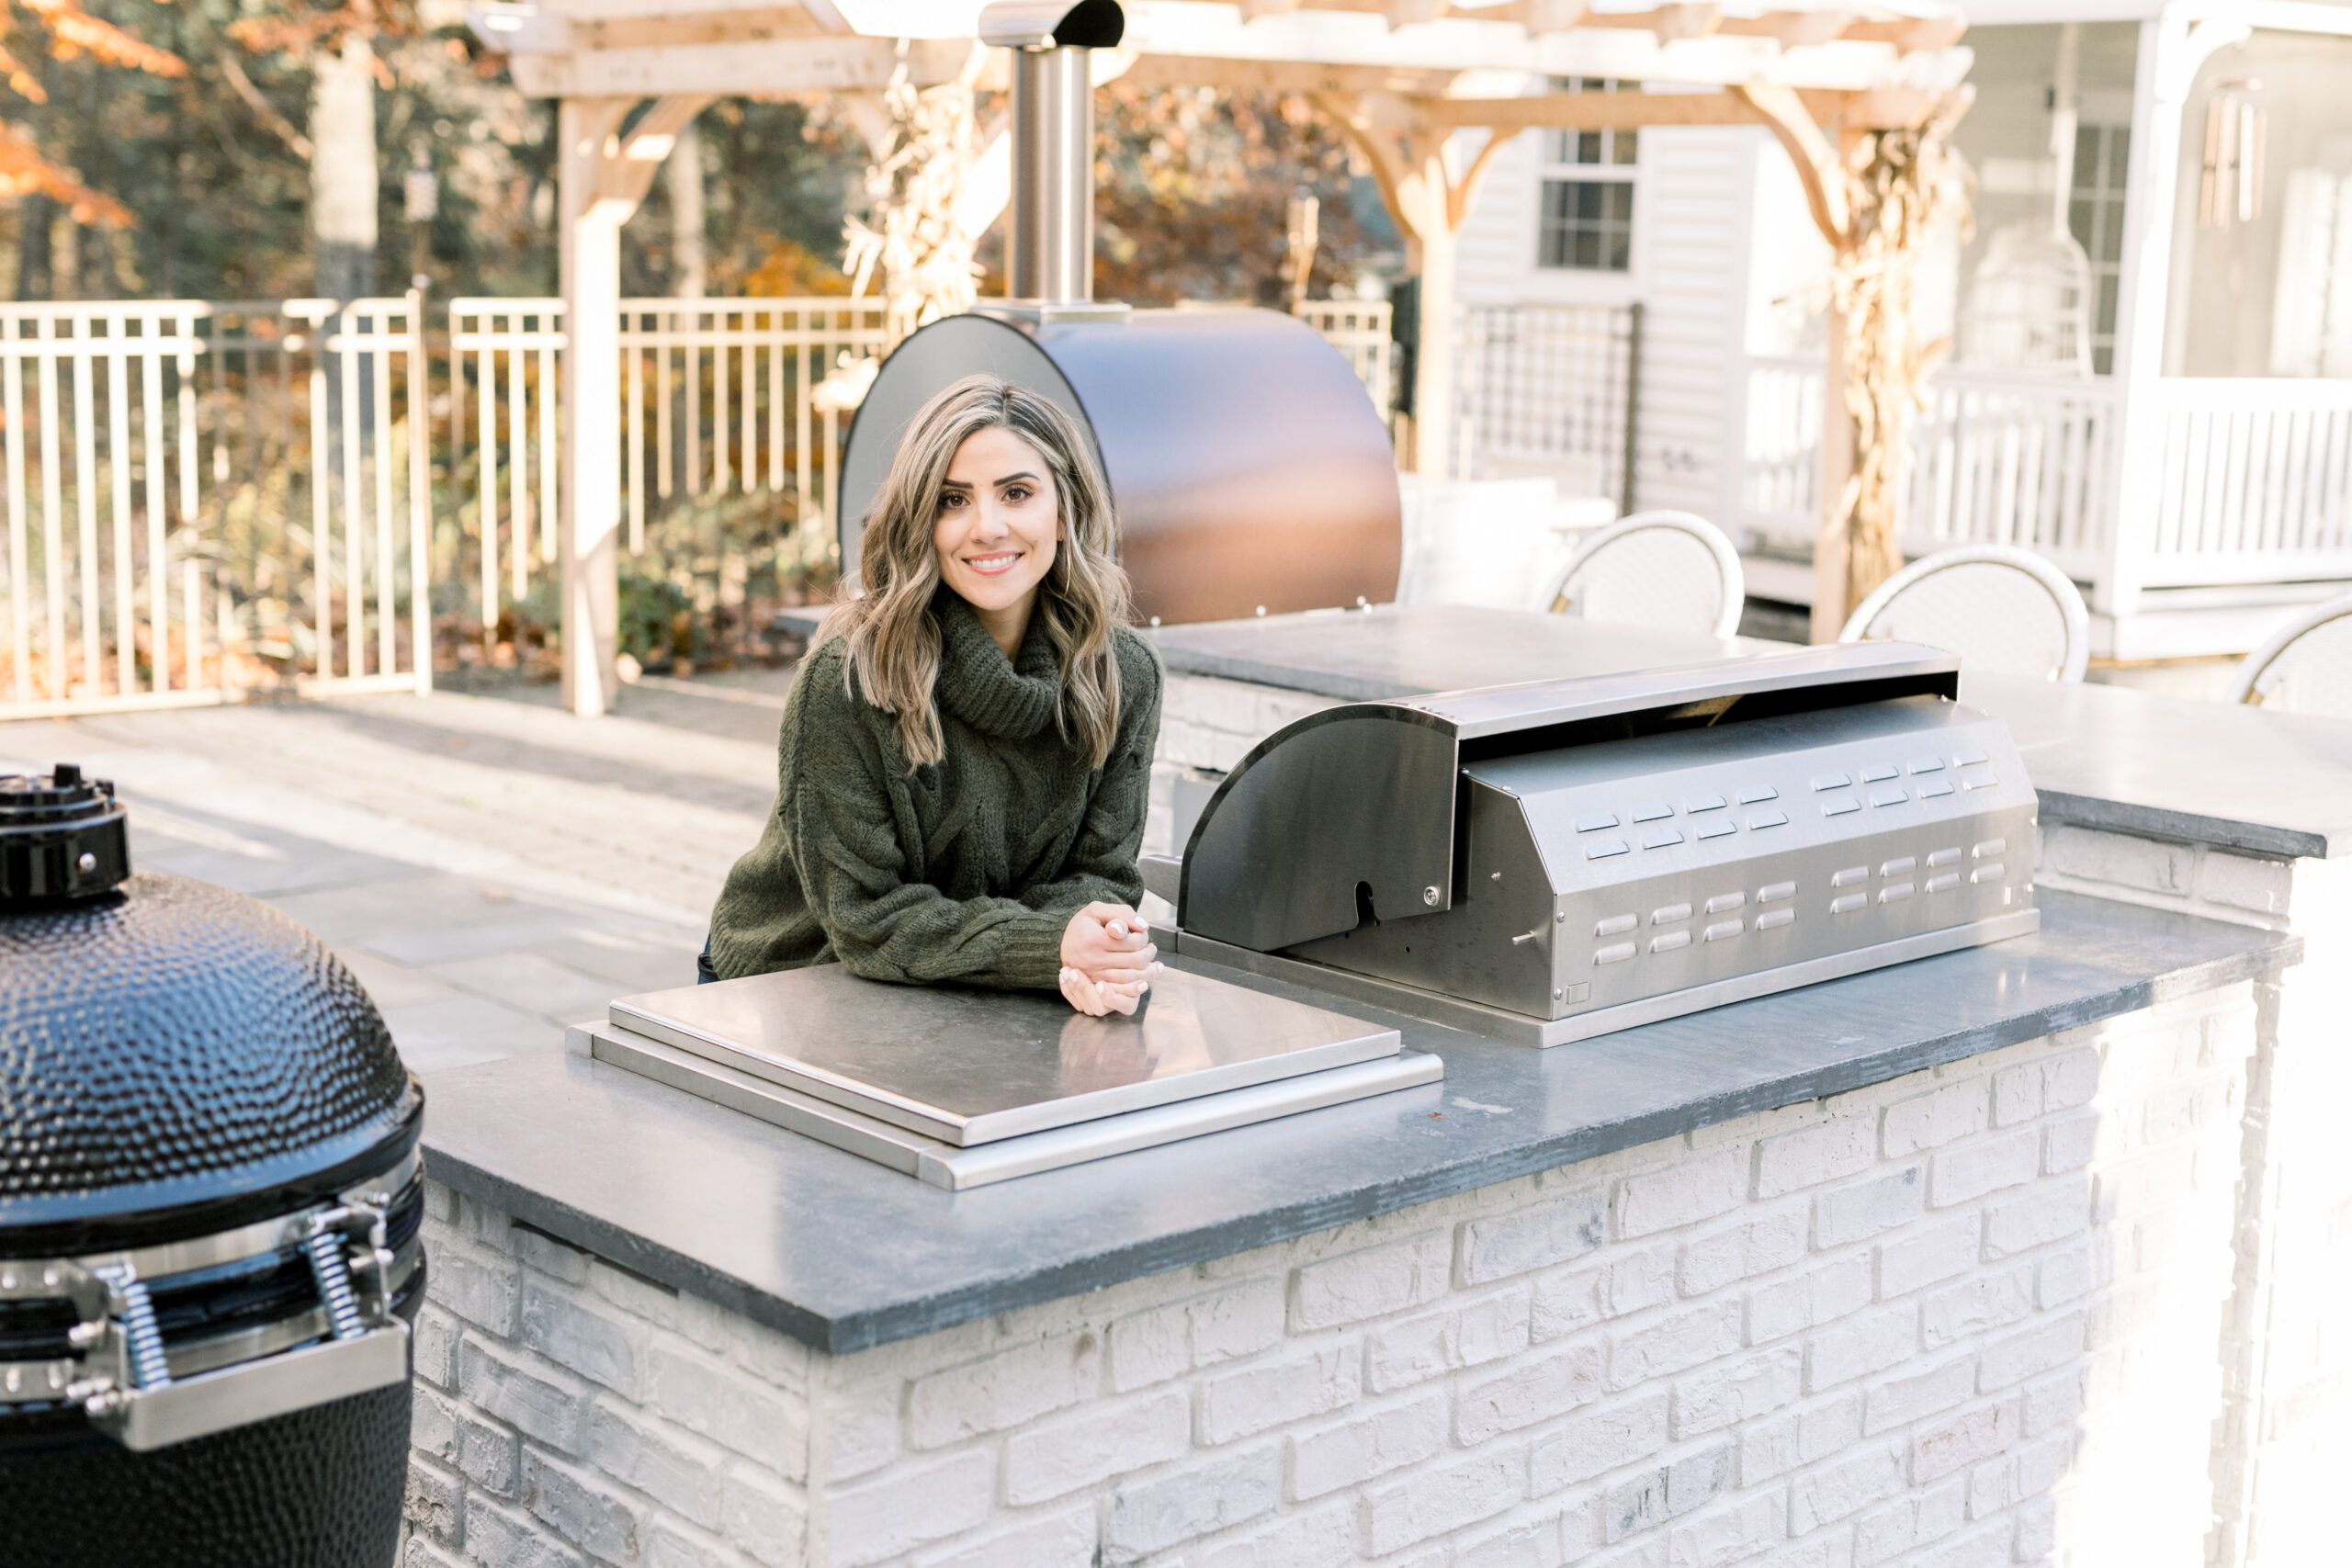 Connecticut life and style blogger Lauren McBride shares her outdoor kitchen with RTA Outdoor Living and Coyote Appliances.